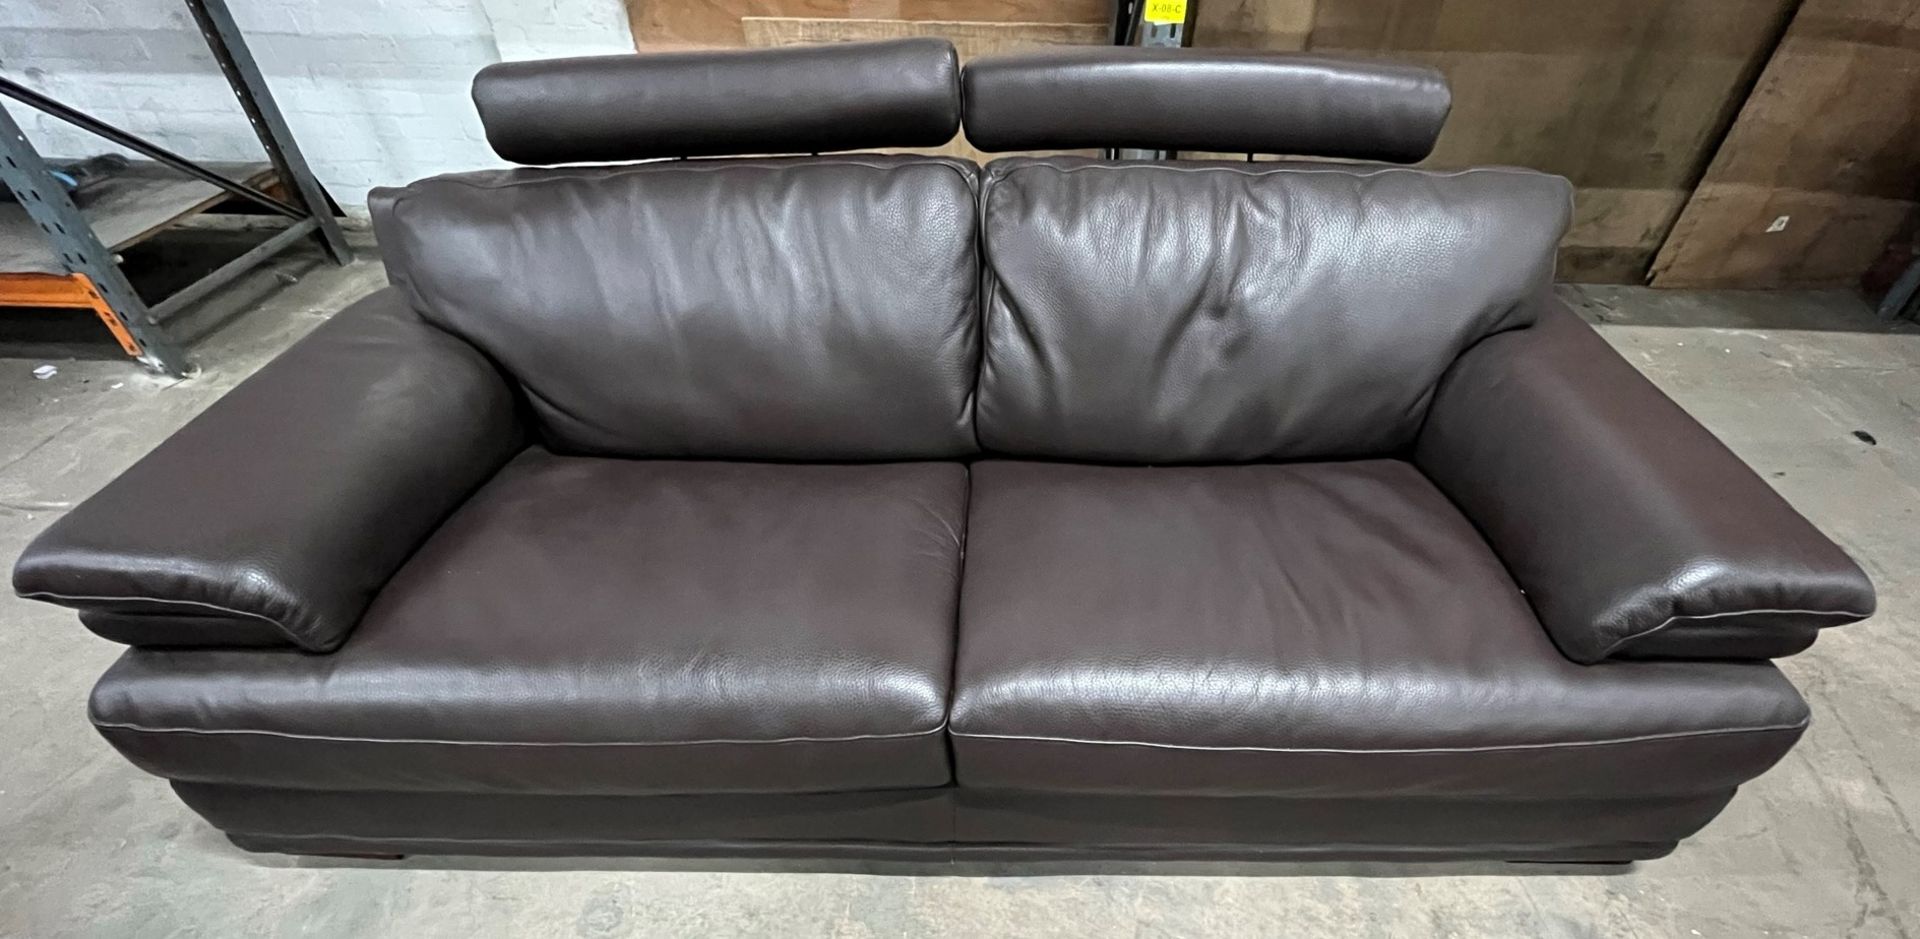 Leather 2 Seater Sofa W/ 2 x Leather Arm Chairs - Image 8 of 12